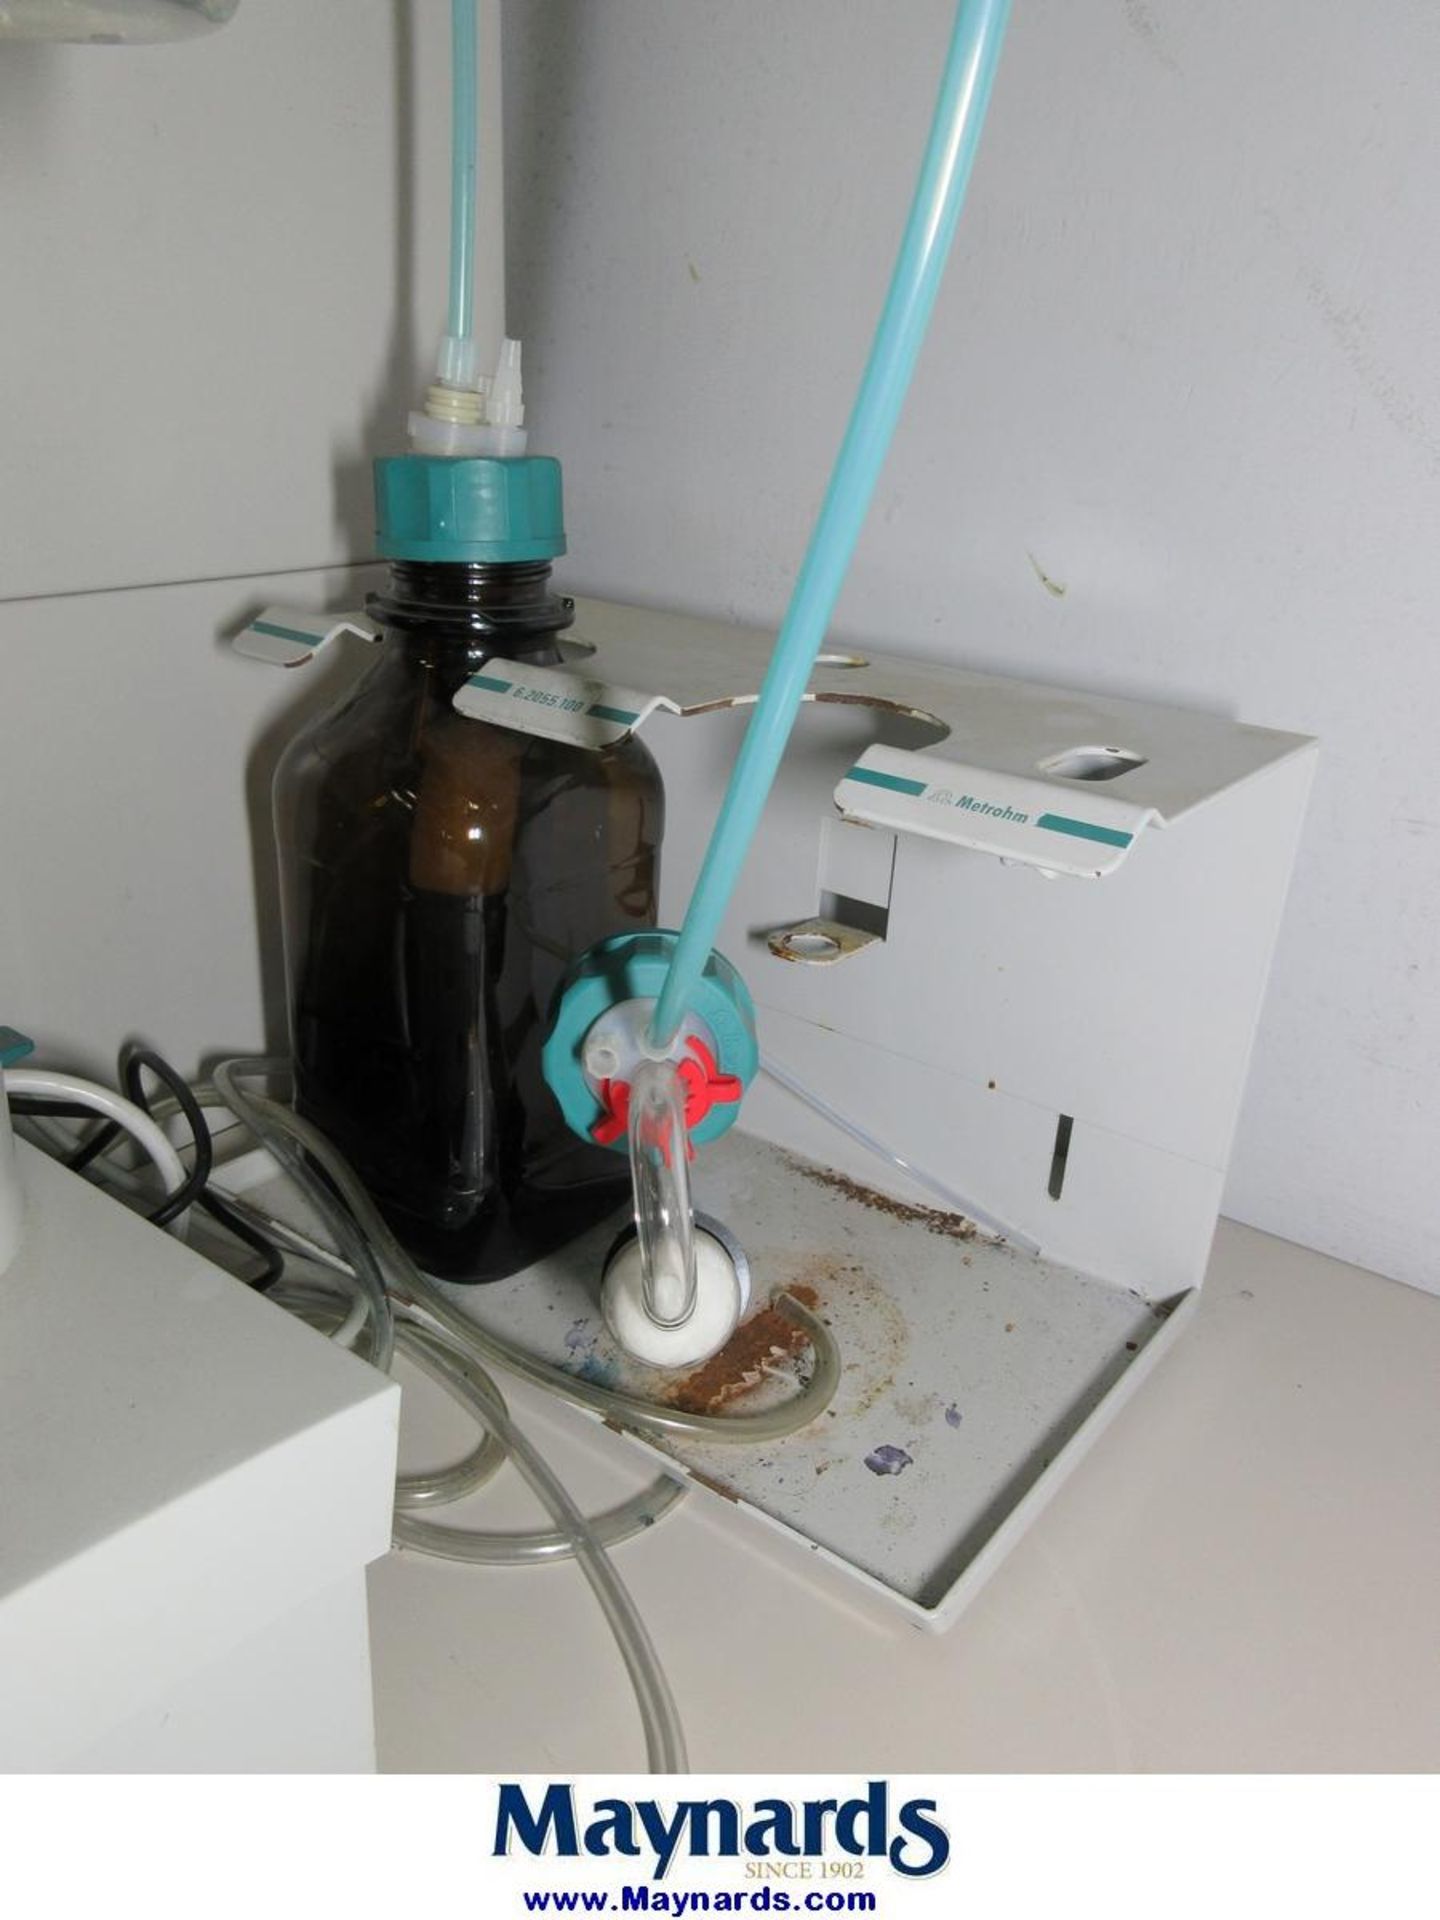 Metrohm 915 KF Ti-Touch Compact Titrator - Image 5 of 6